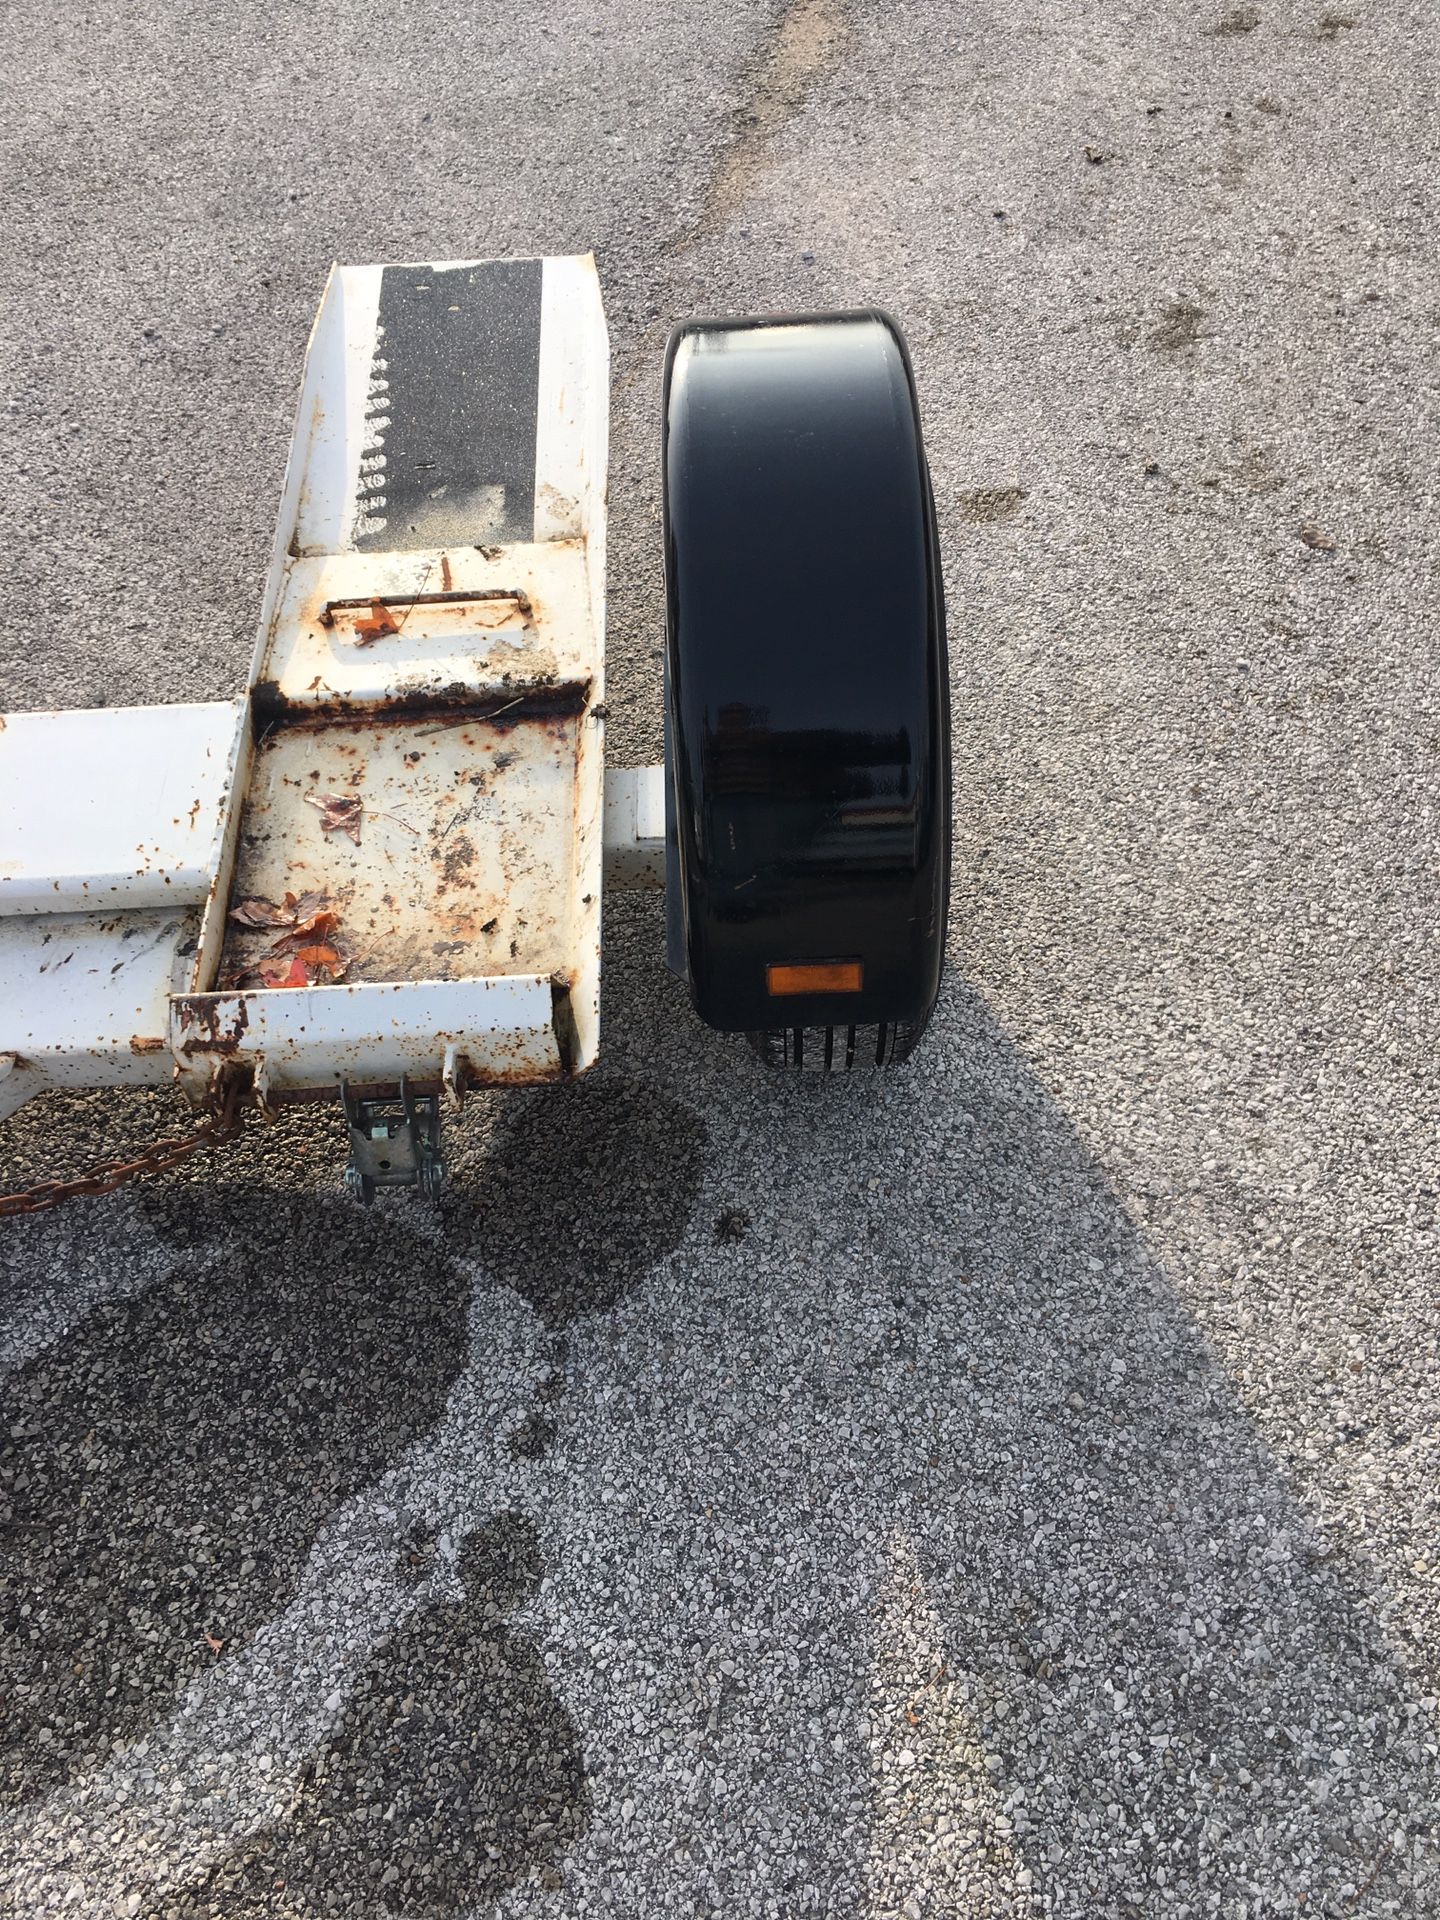 Tow dolly for cars